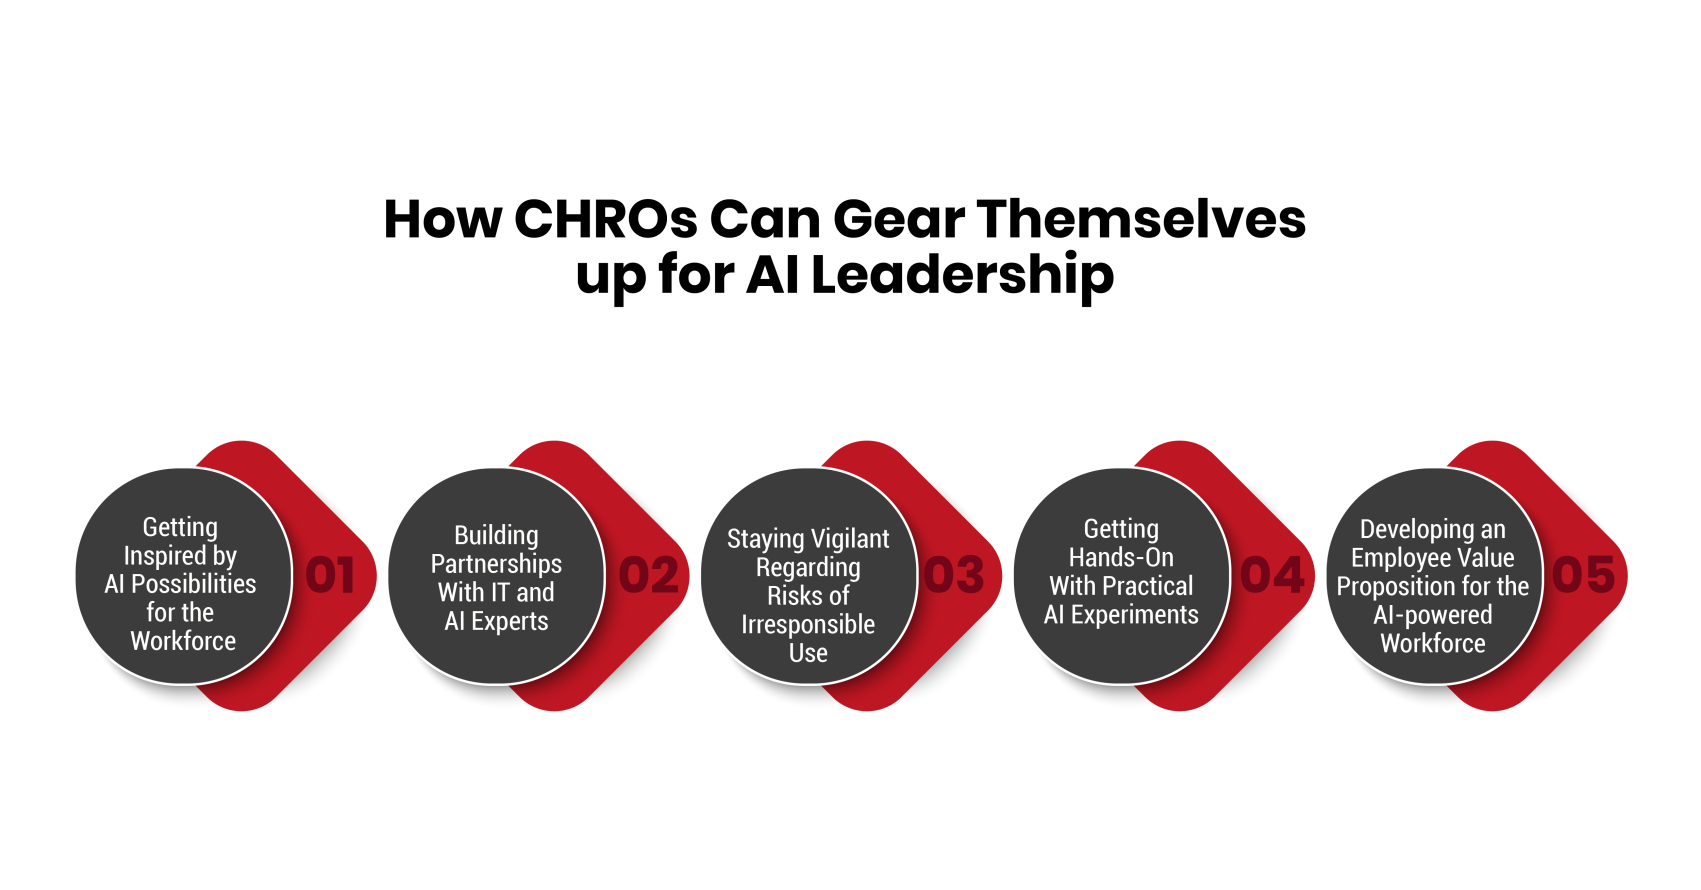 How CHROs Can Prepare Themselves for AI Leadership